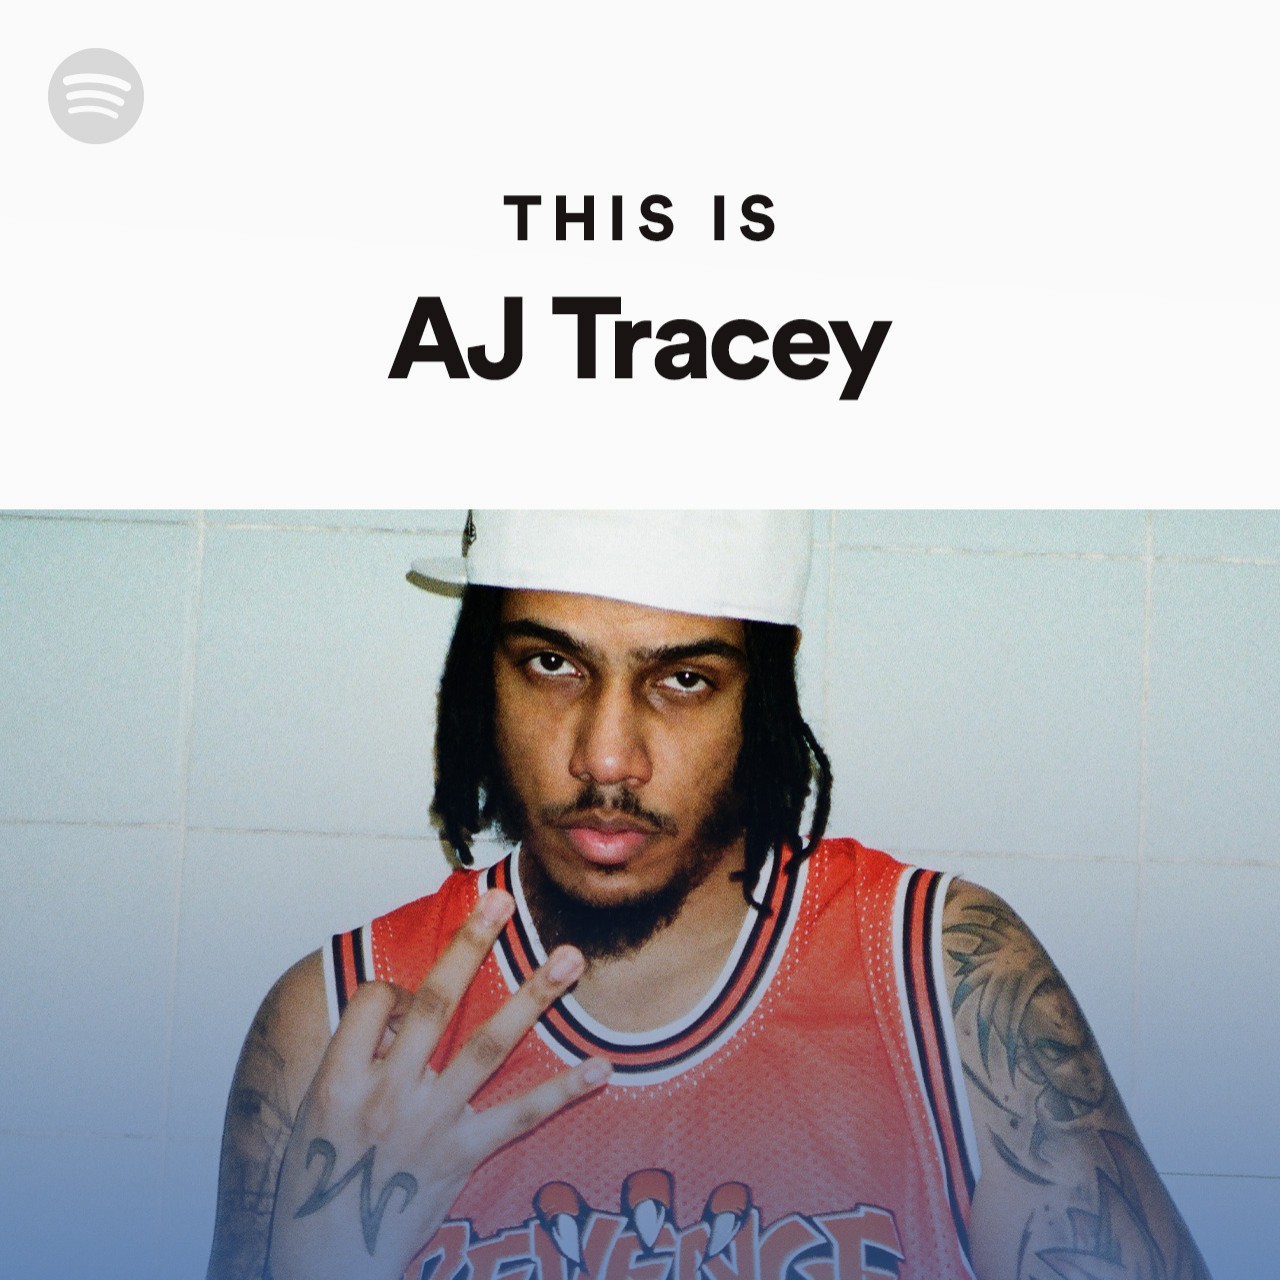 This Is AJ Tracey